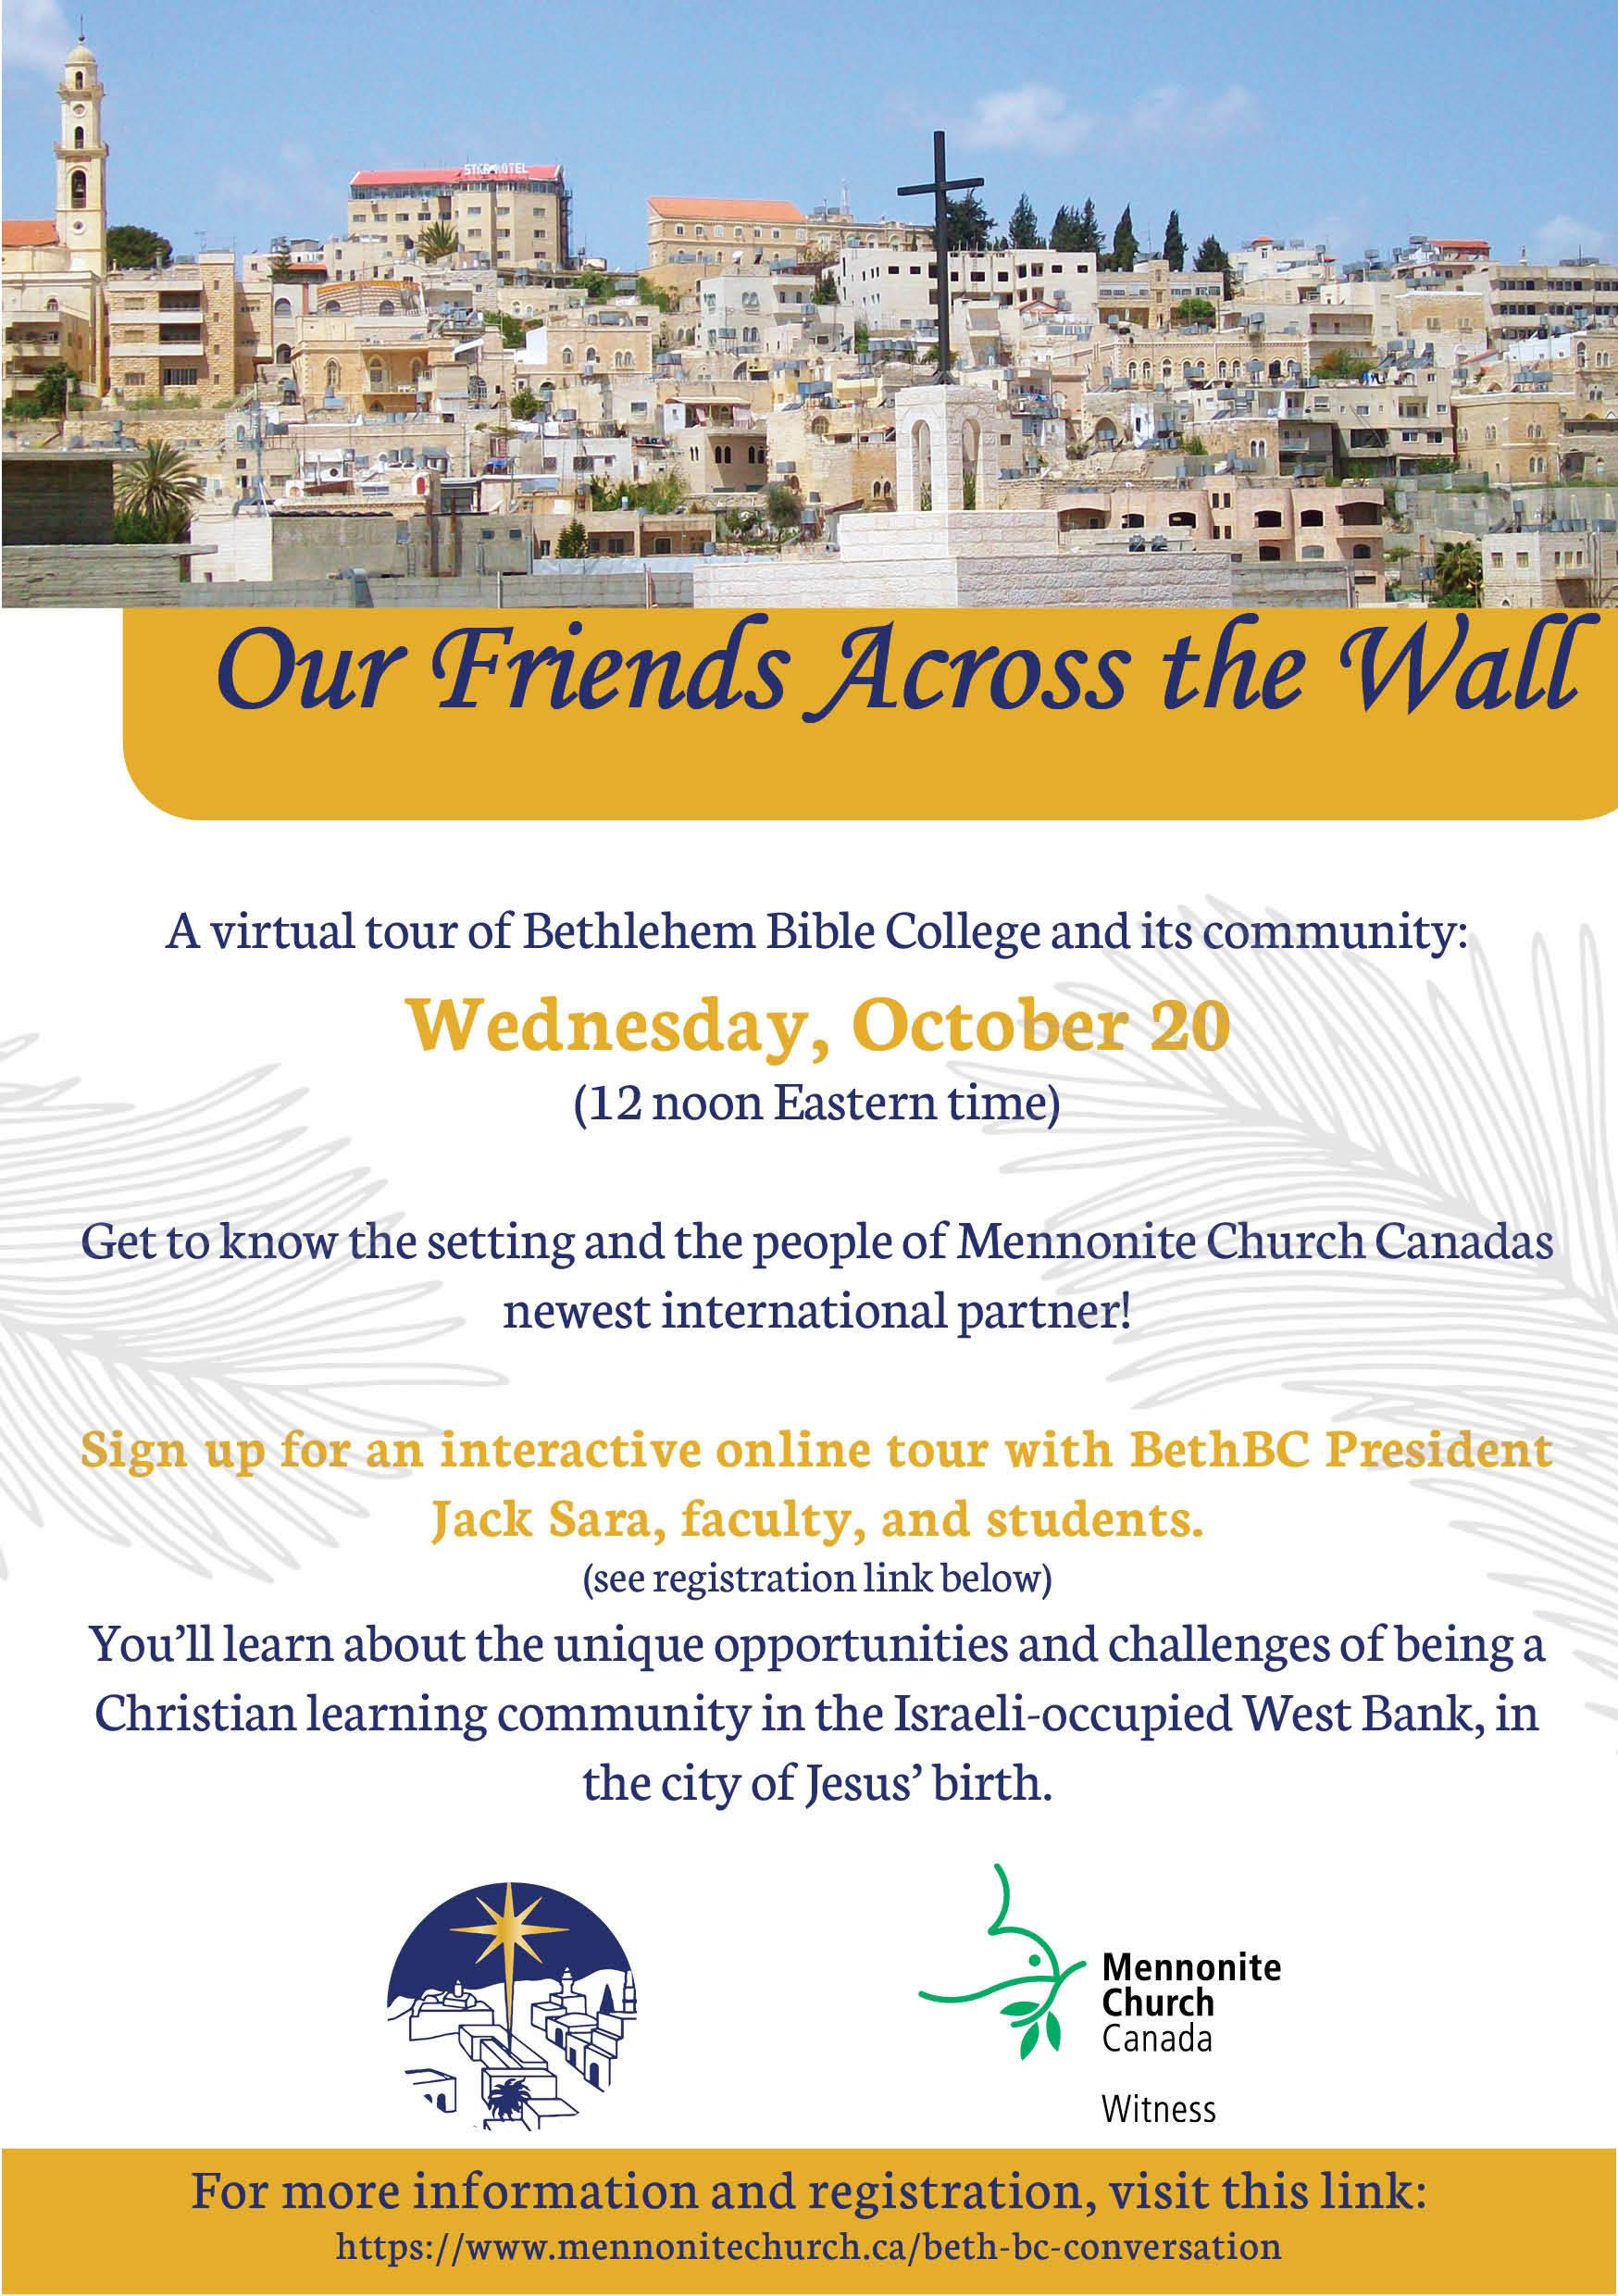 Getting to know MC Canada's new partner, Bethlehem Bible College